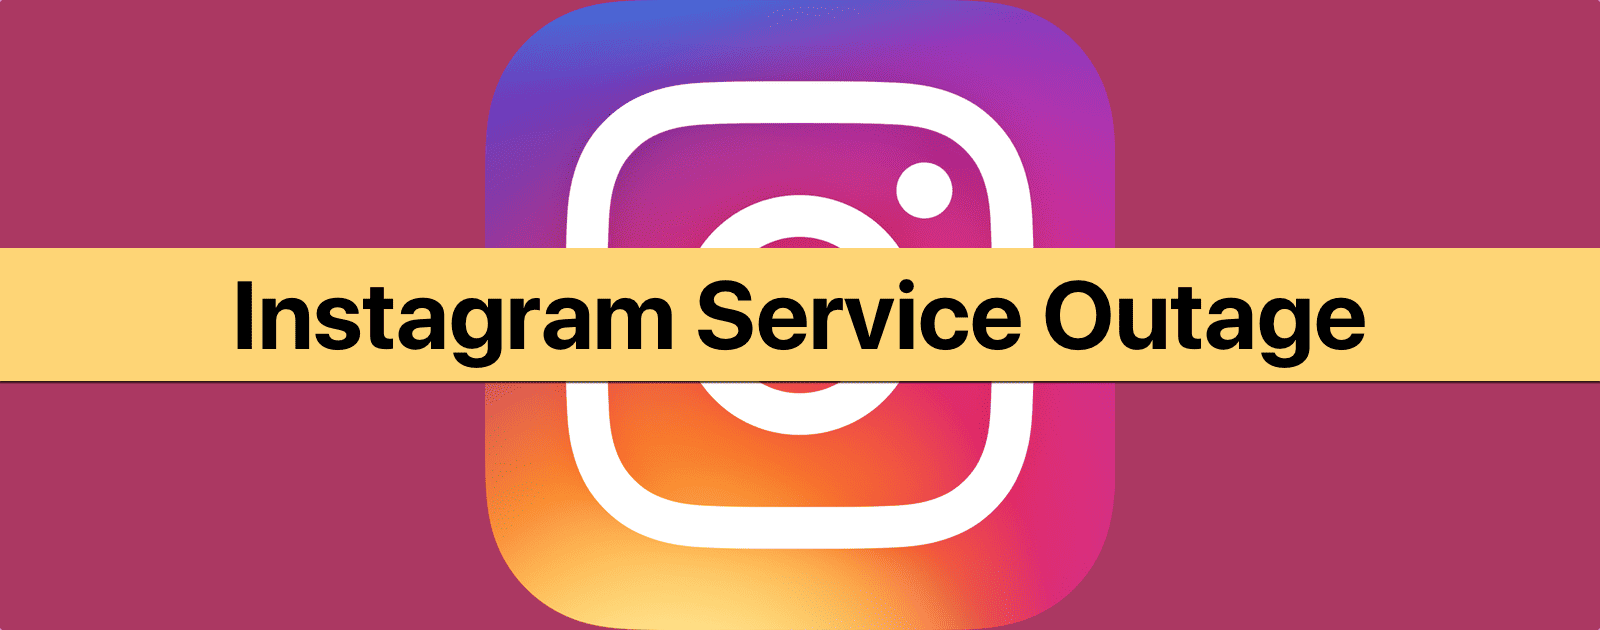 Are You Experiencing an Instagram Service Outage? Here’s How to Report It